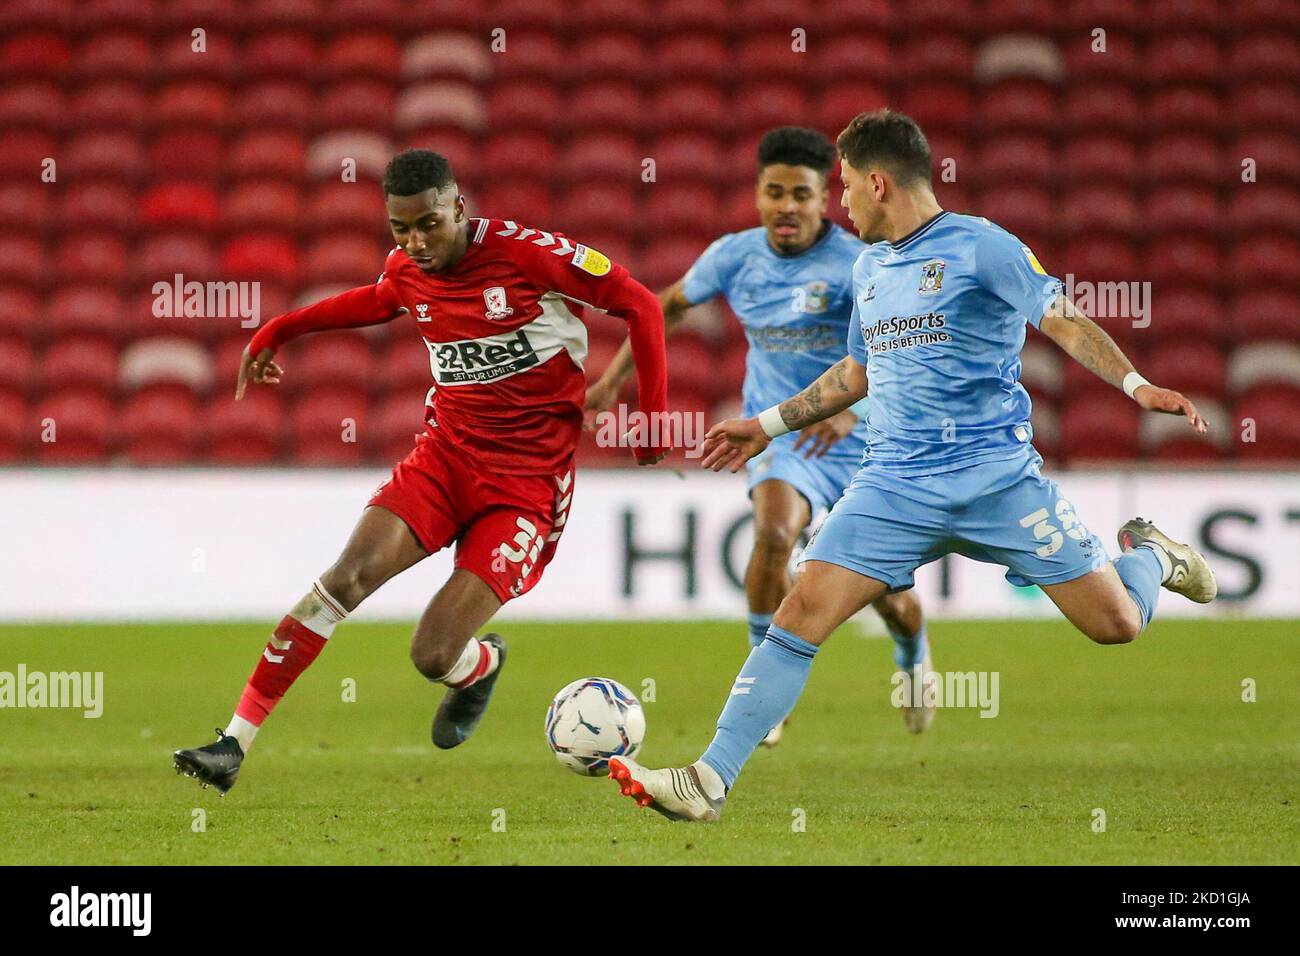 Coventry City's Ryan Howley tackles Middlesbrough's Isaiah Jones during the Sky Bet Championship match between Middlesbrough and Coventry City at the Riverside Stadium, Middlesbrough on Saturday 29th January 2022. (Photo by Michael Driver/MI News/NurPhoto) Stock Photo